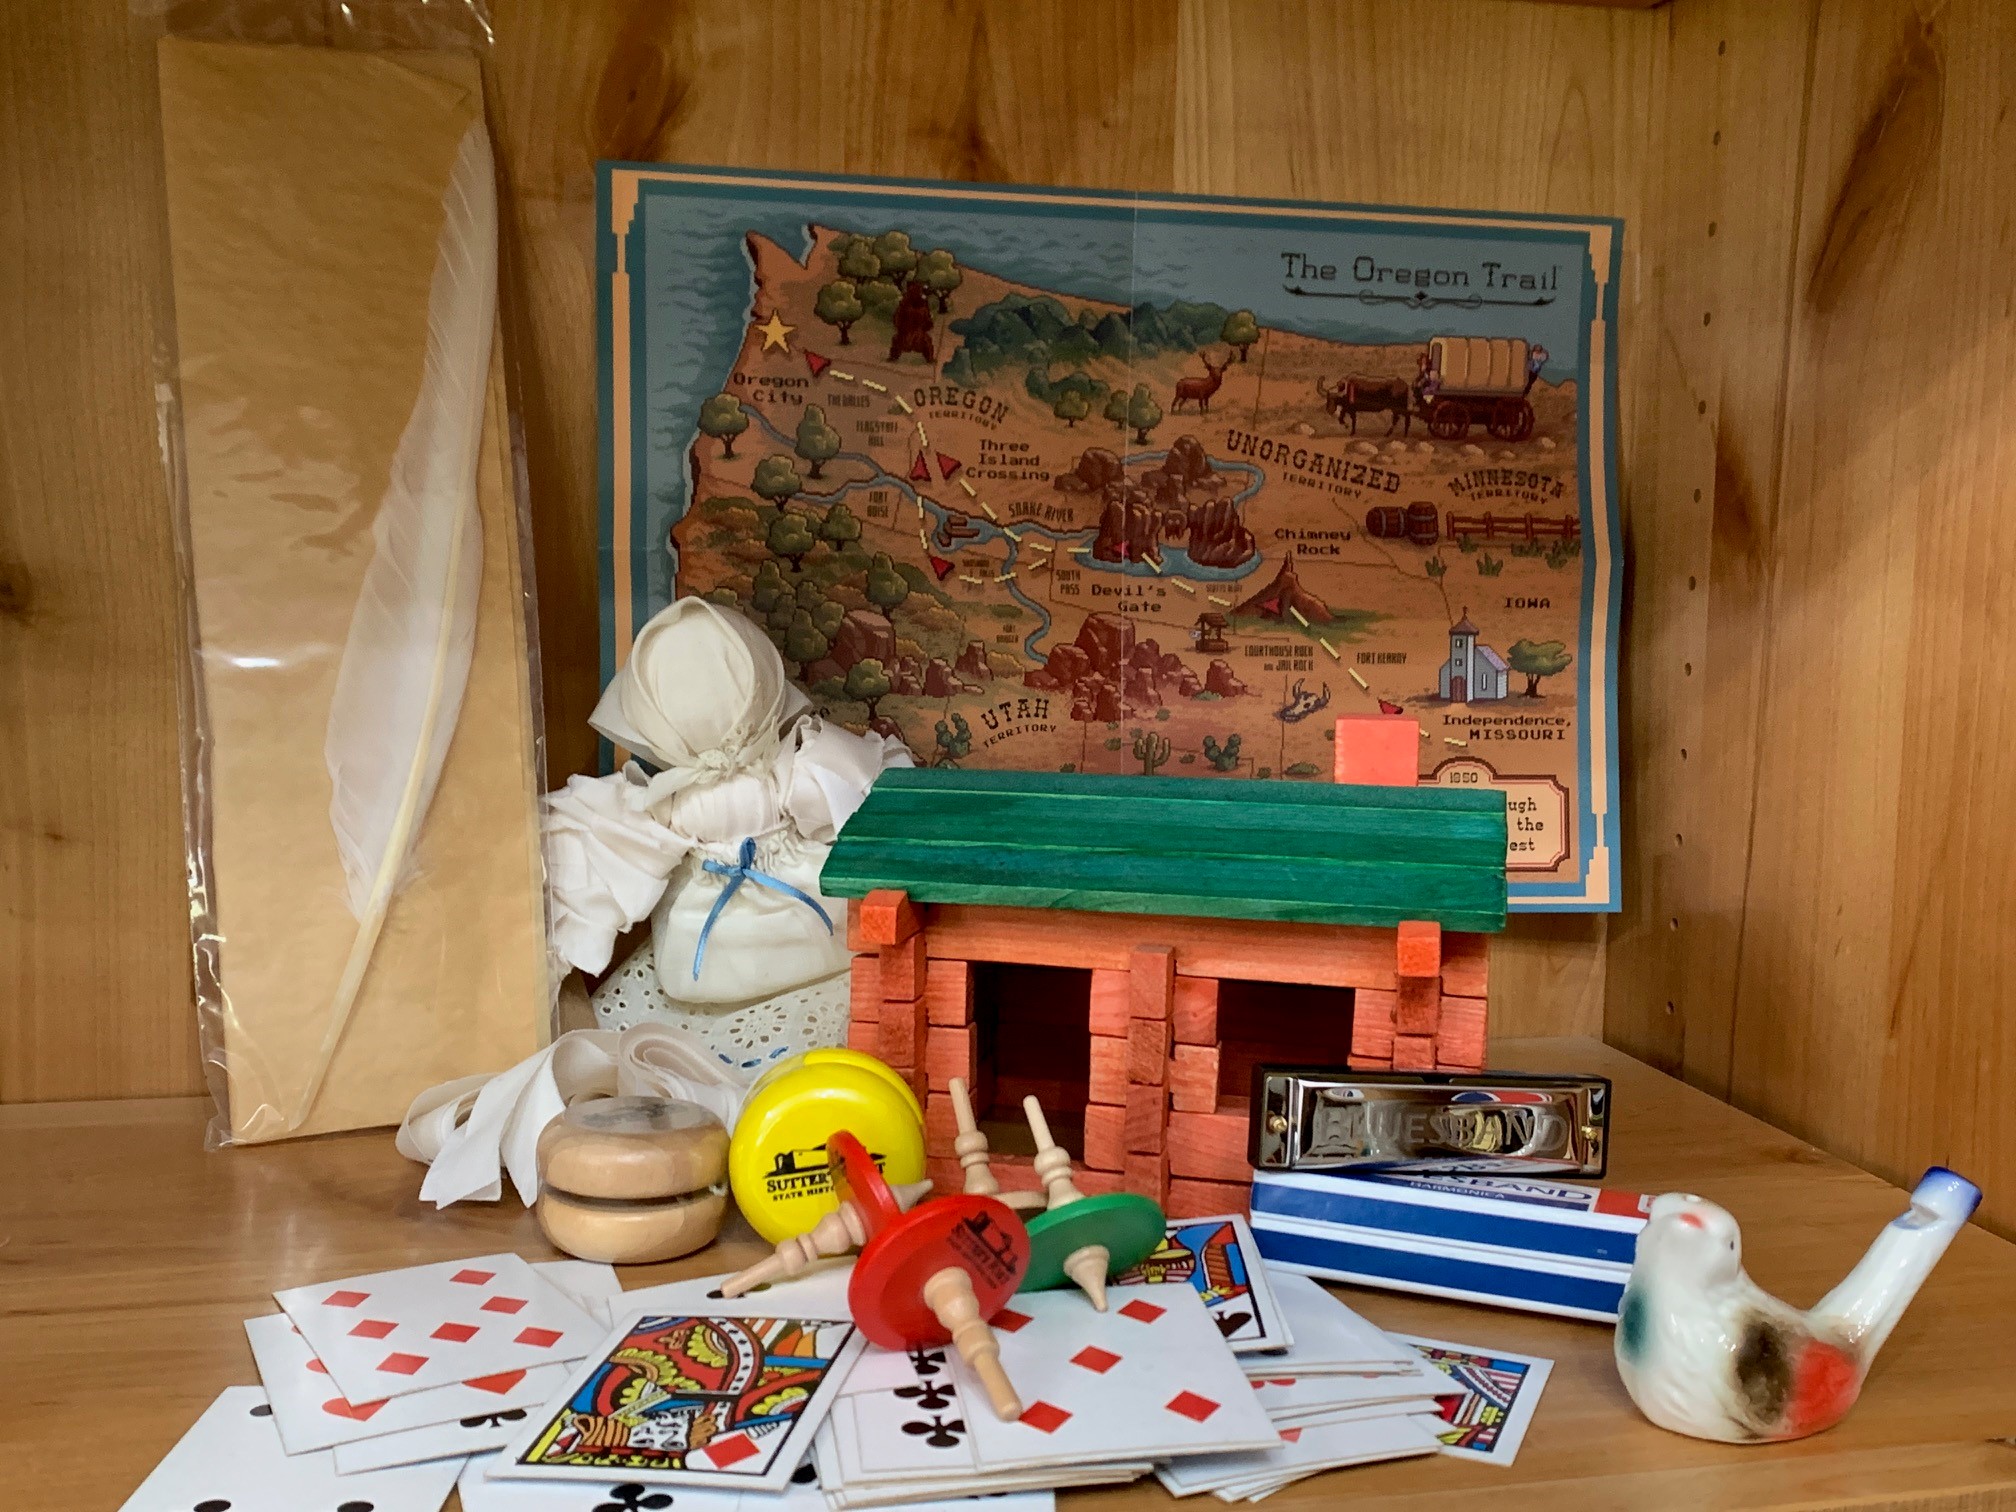 retail display shelf featuring various toys: quill, rag doll, playing cards, tops, harmonica, bird whistle, yo-yos, log cabin, Oregon Trail map